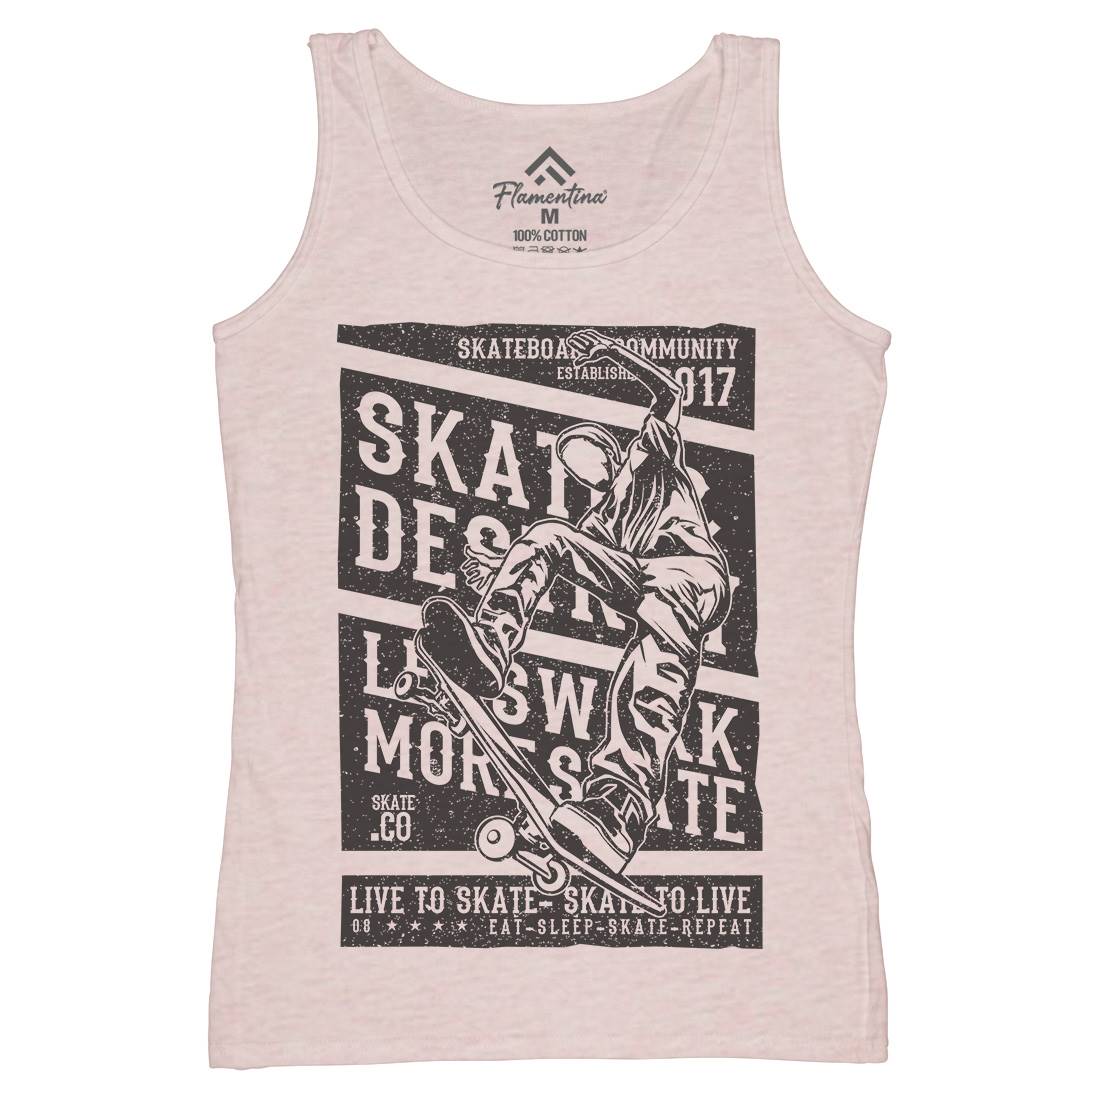 Live To Womens Organic Tank Top Vest Skate A708